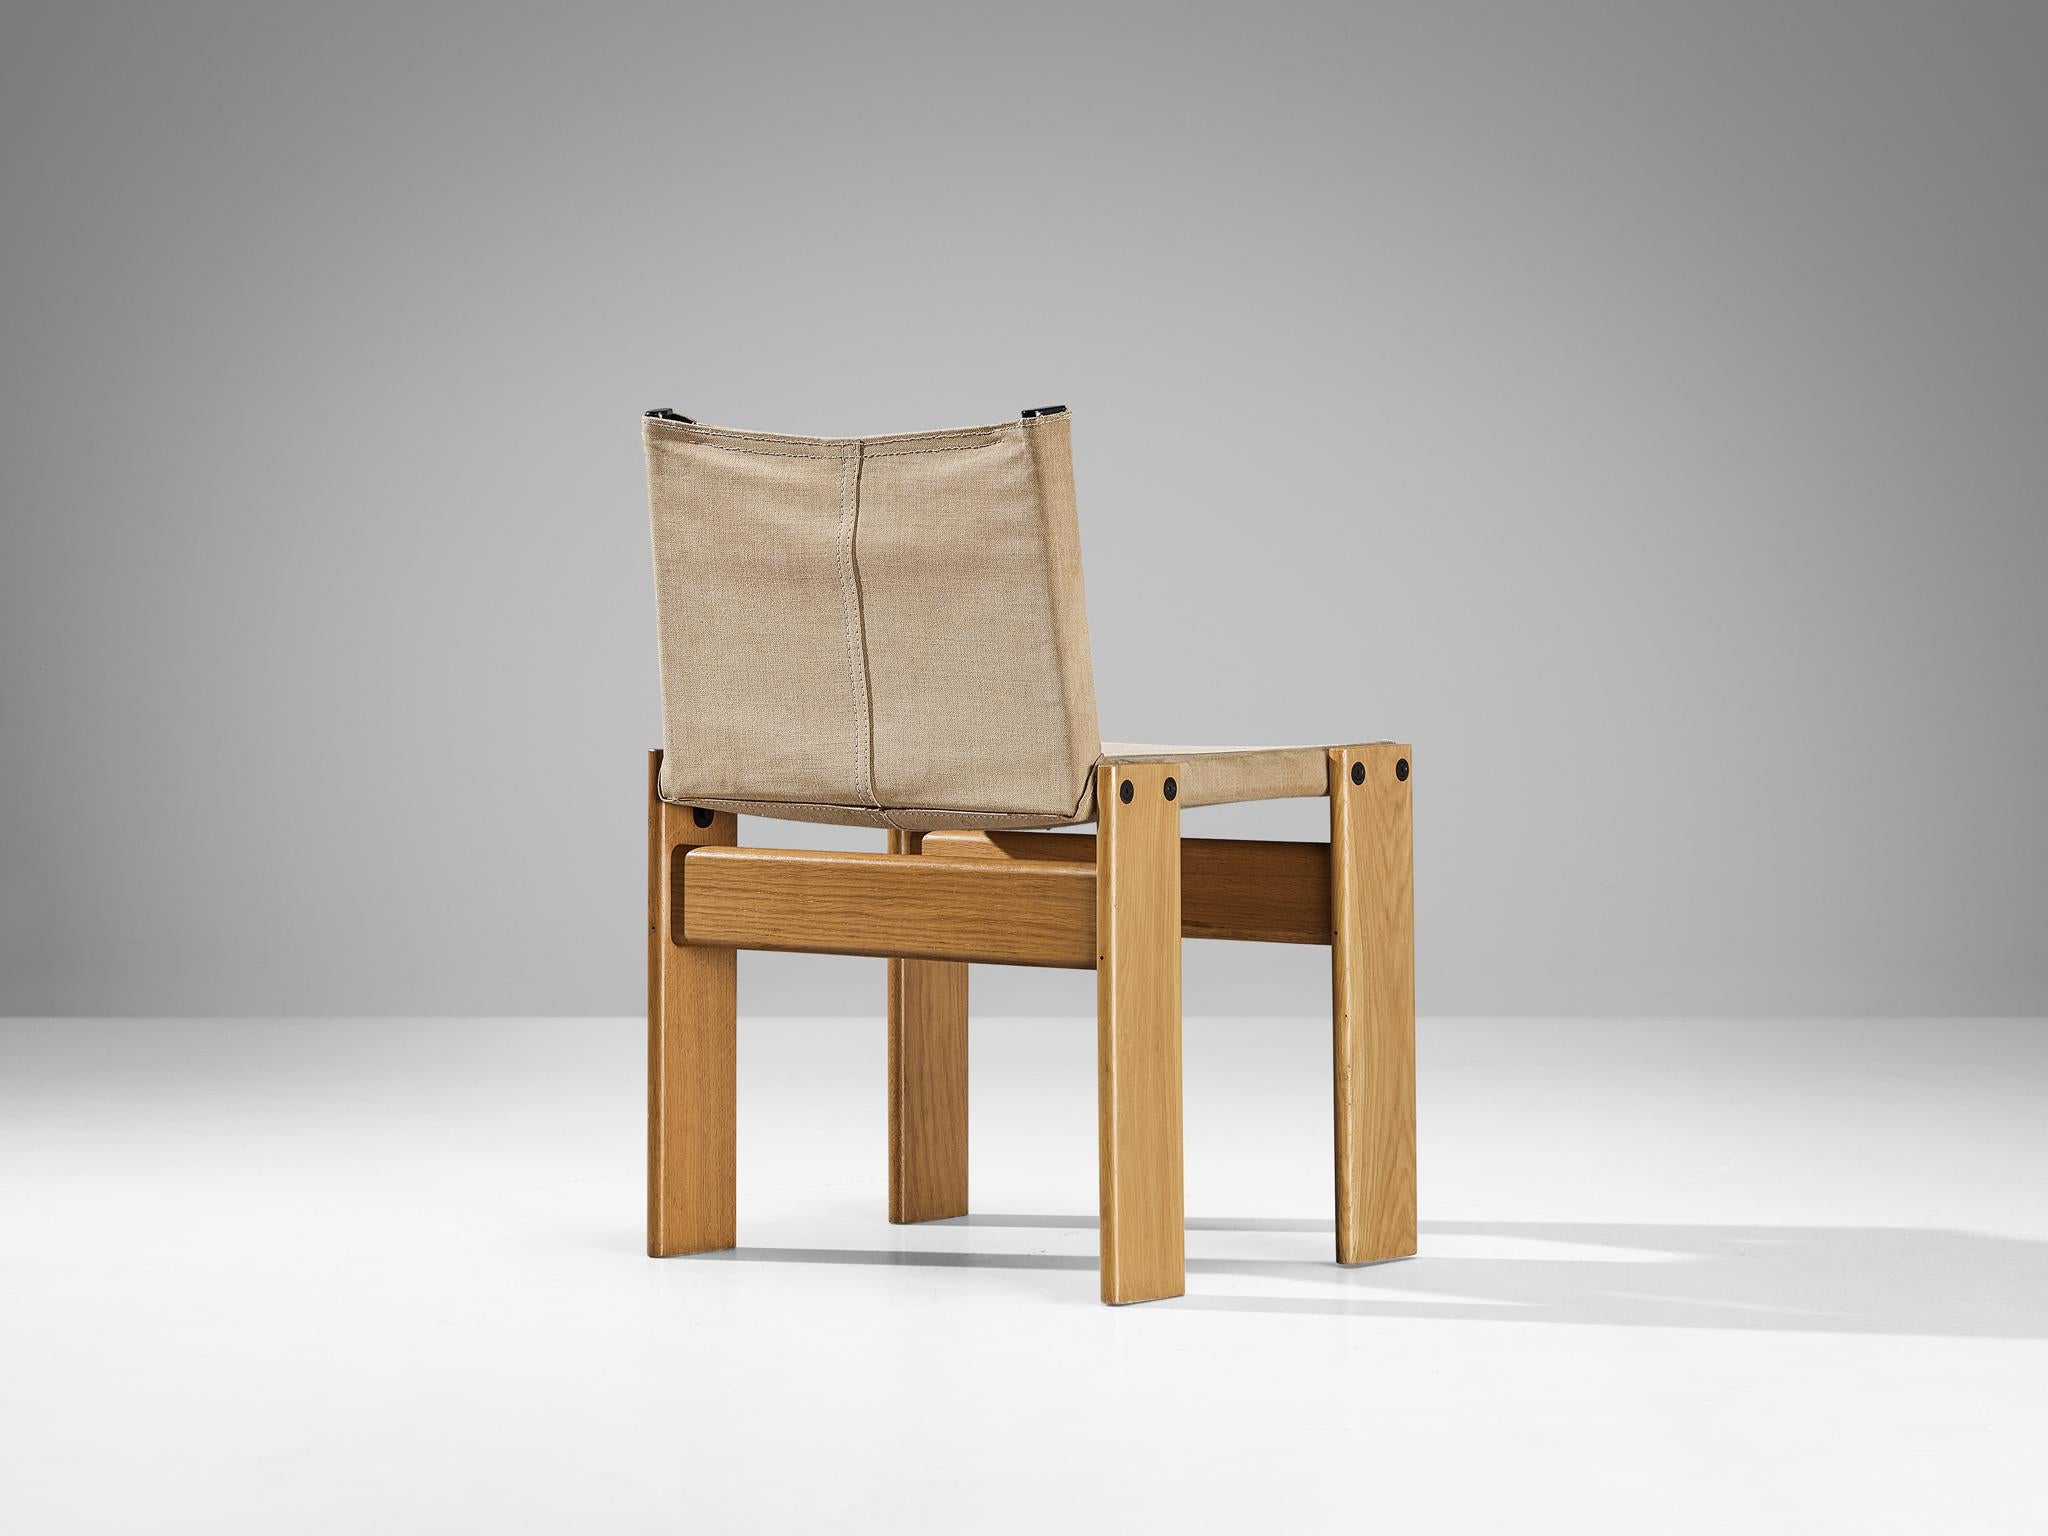 Italian Afra & Tobia Scarpa for Molteni 'Monk' Chair in Oak and Beige Canvas